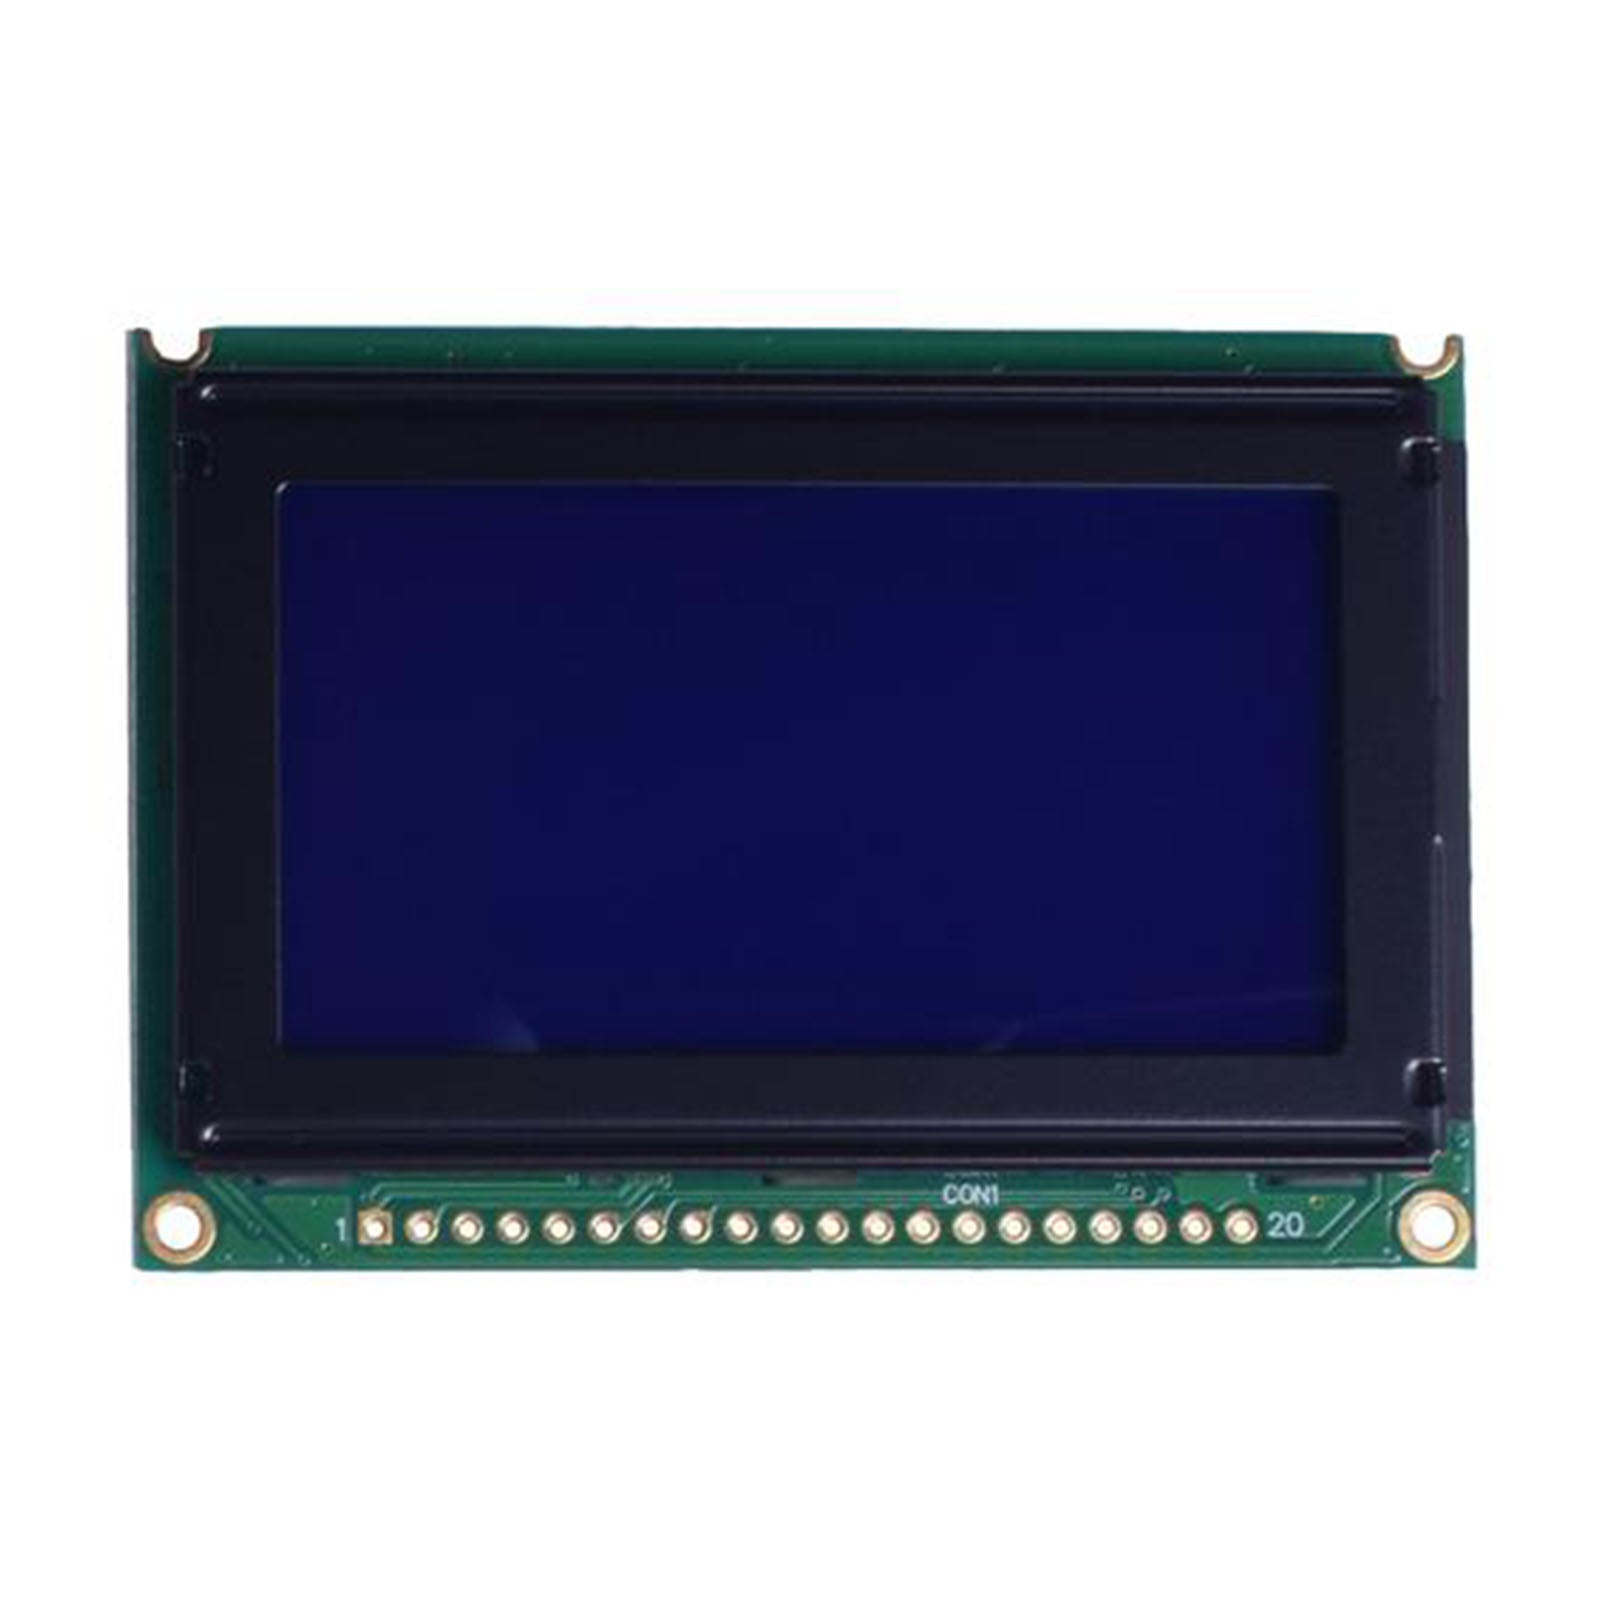 128x64 LCD 2.62 inch graphic blue display module with MCU interface